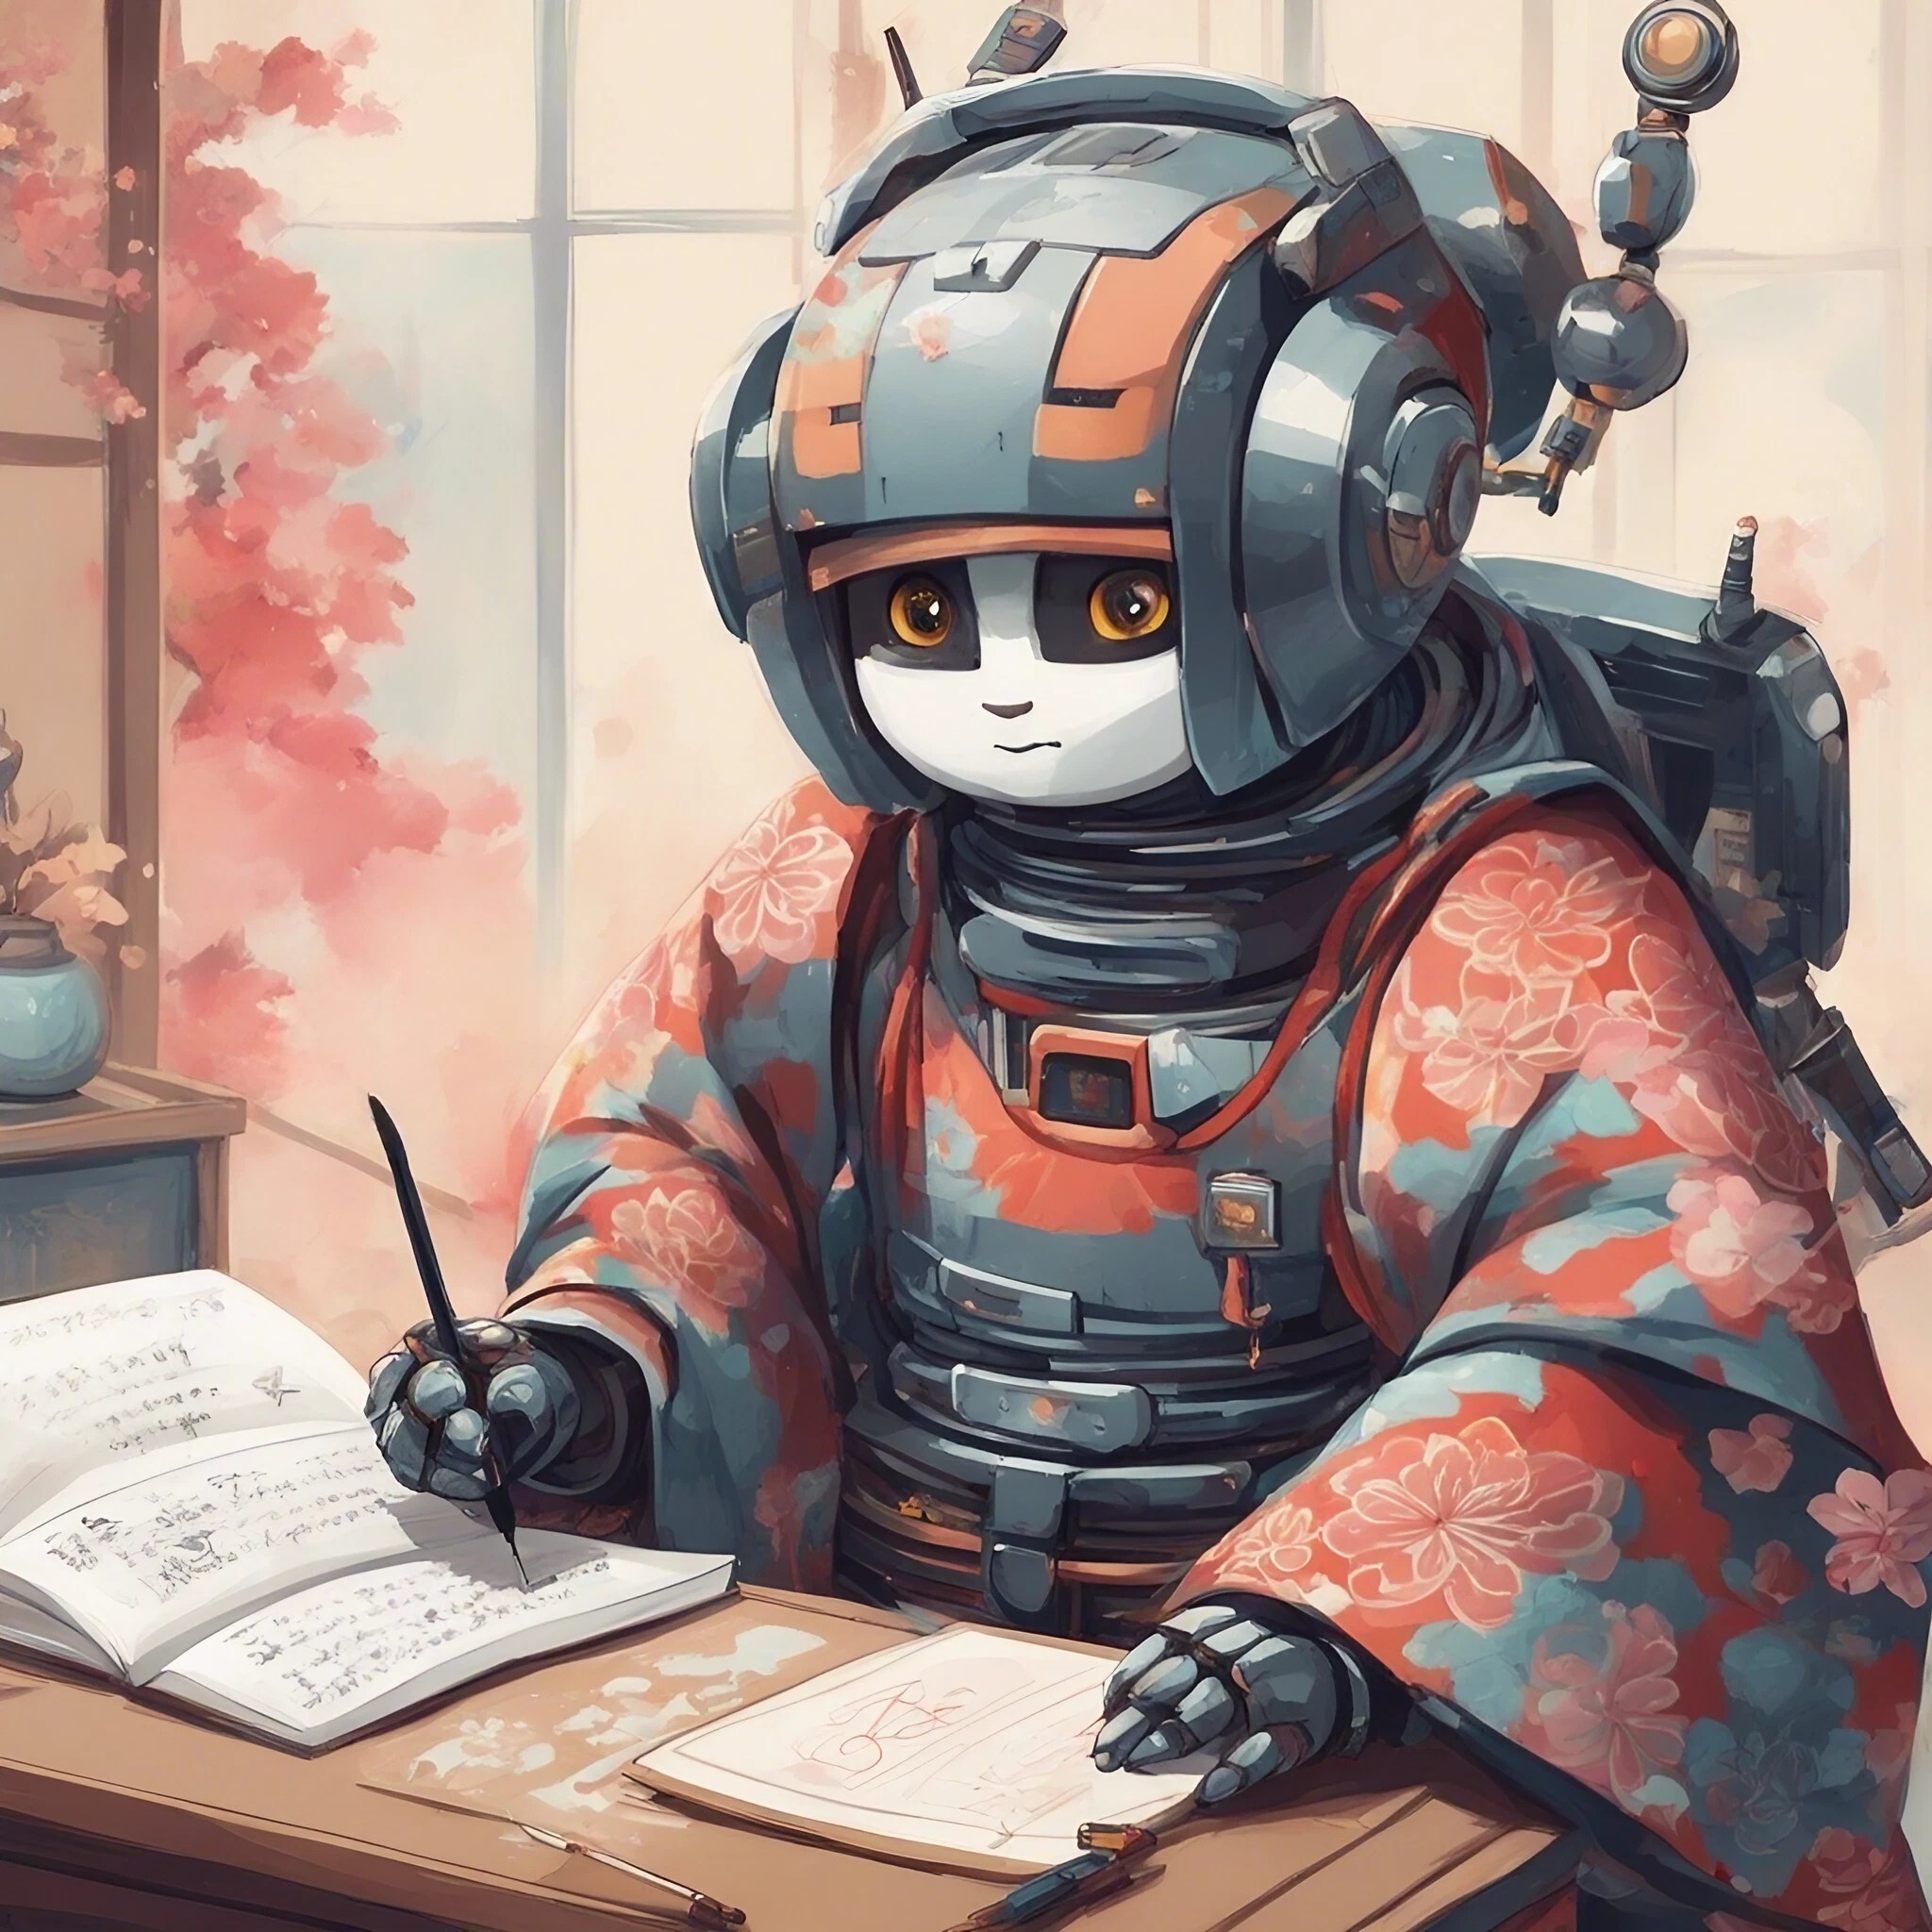 A cute robot wearing a kimono writes calligraphy with one single brush